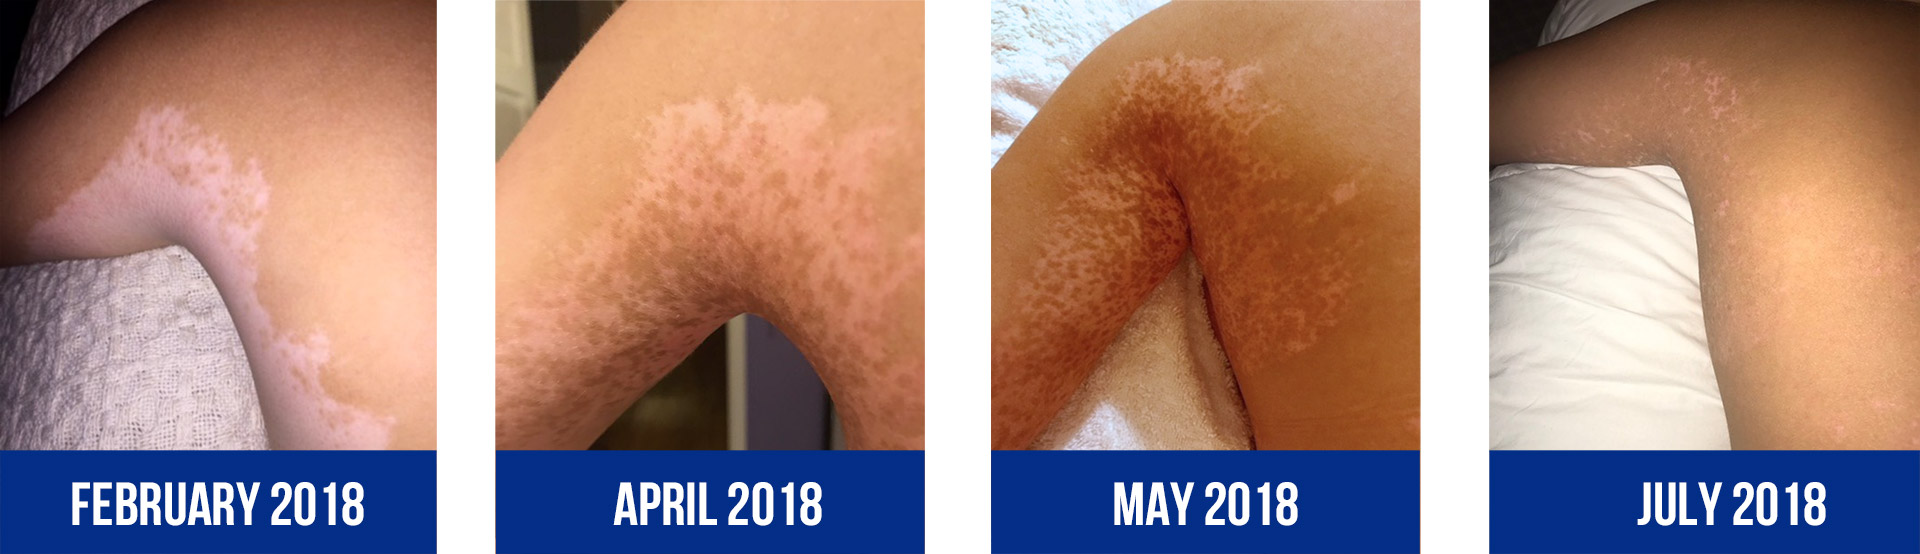 Series of 4 photos from February 2018 through July 2018 showing a patient's shoulder showing progressive regimentation as a result of their UV phototherapy treatments.